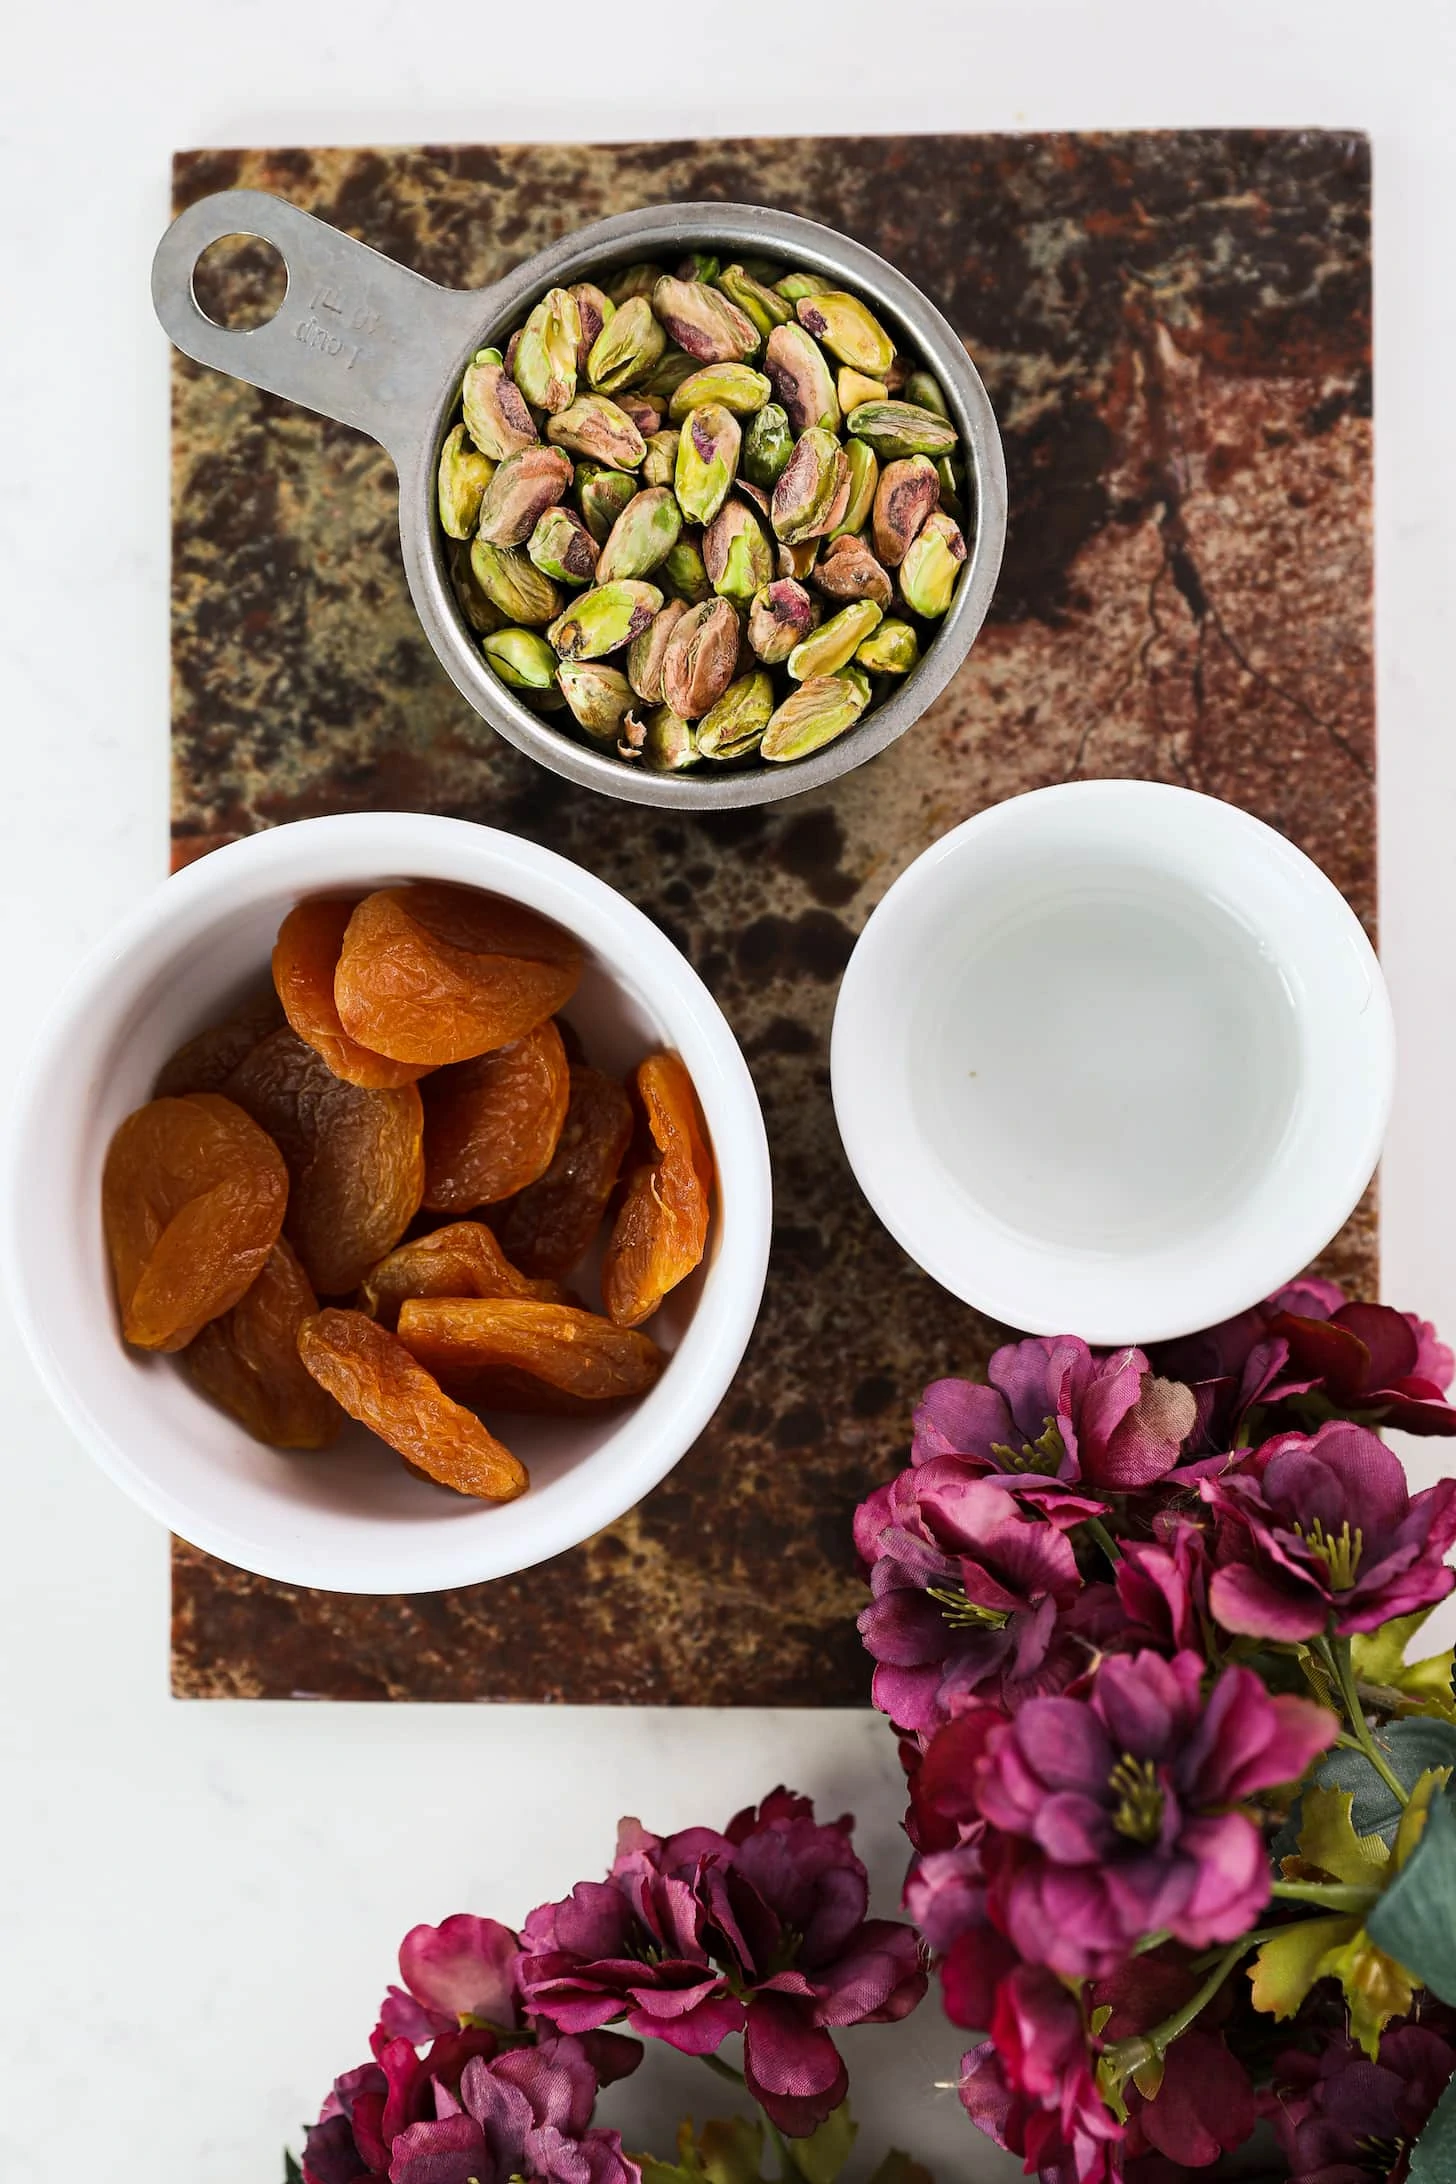 three different sized bowls holding pistachios, dried apricots and oil on a textured board with purple flowers in one corner.